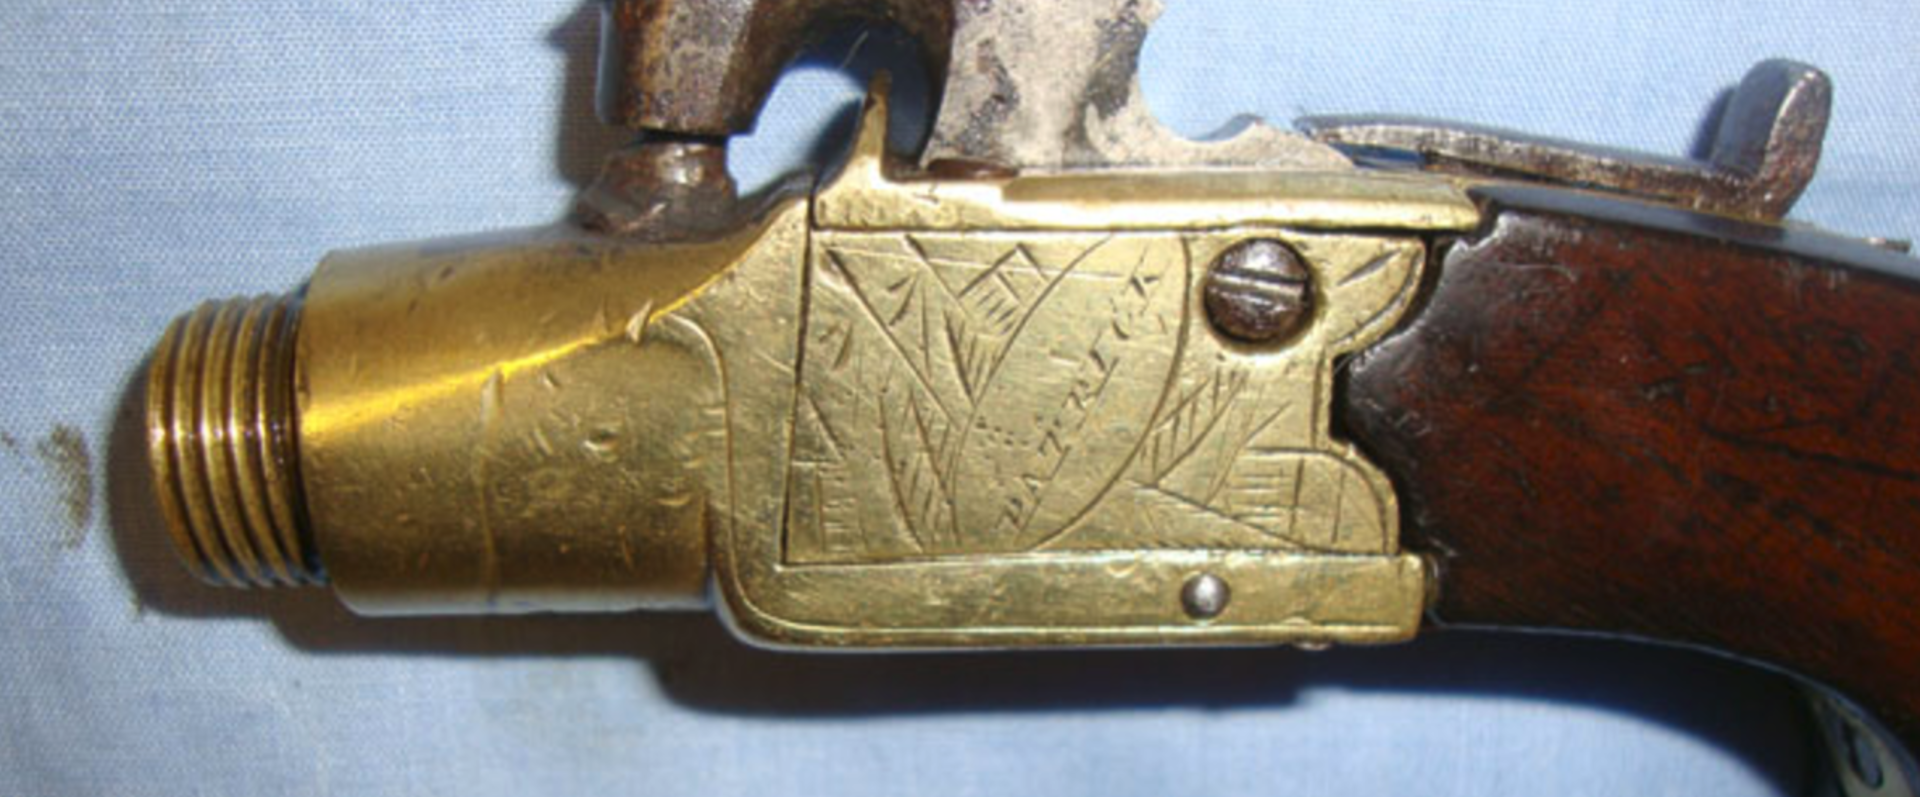 1795-1832 English, .44" Bore, Brass Framed Percussion Pocket Pistol With Screw Off Barrel By Patrick - Image 2 of 3